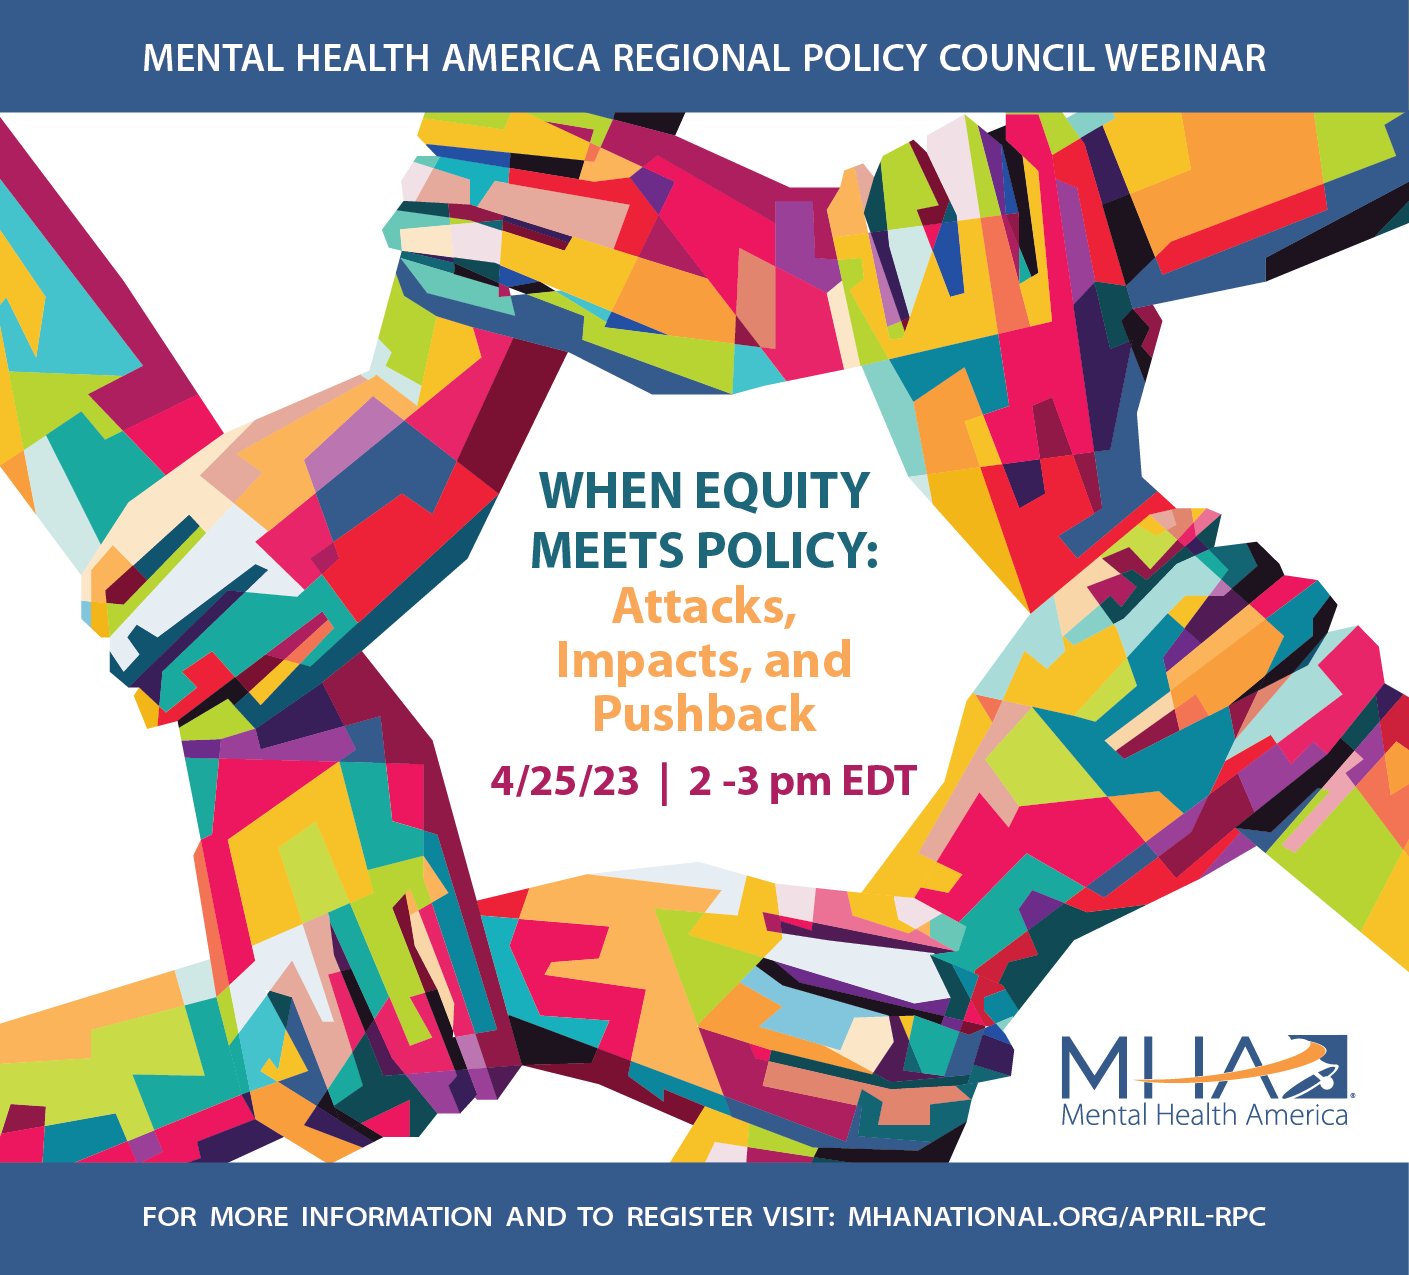 When Equity Meets Policy: Attacks, Impacts, and Pushback | 4/25/23 | 2-3 pm EDT